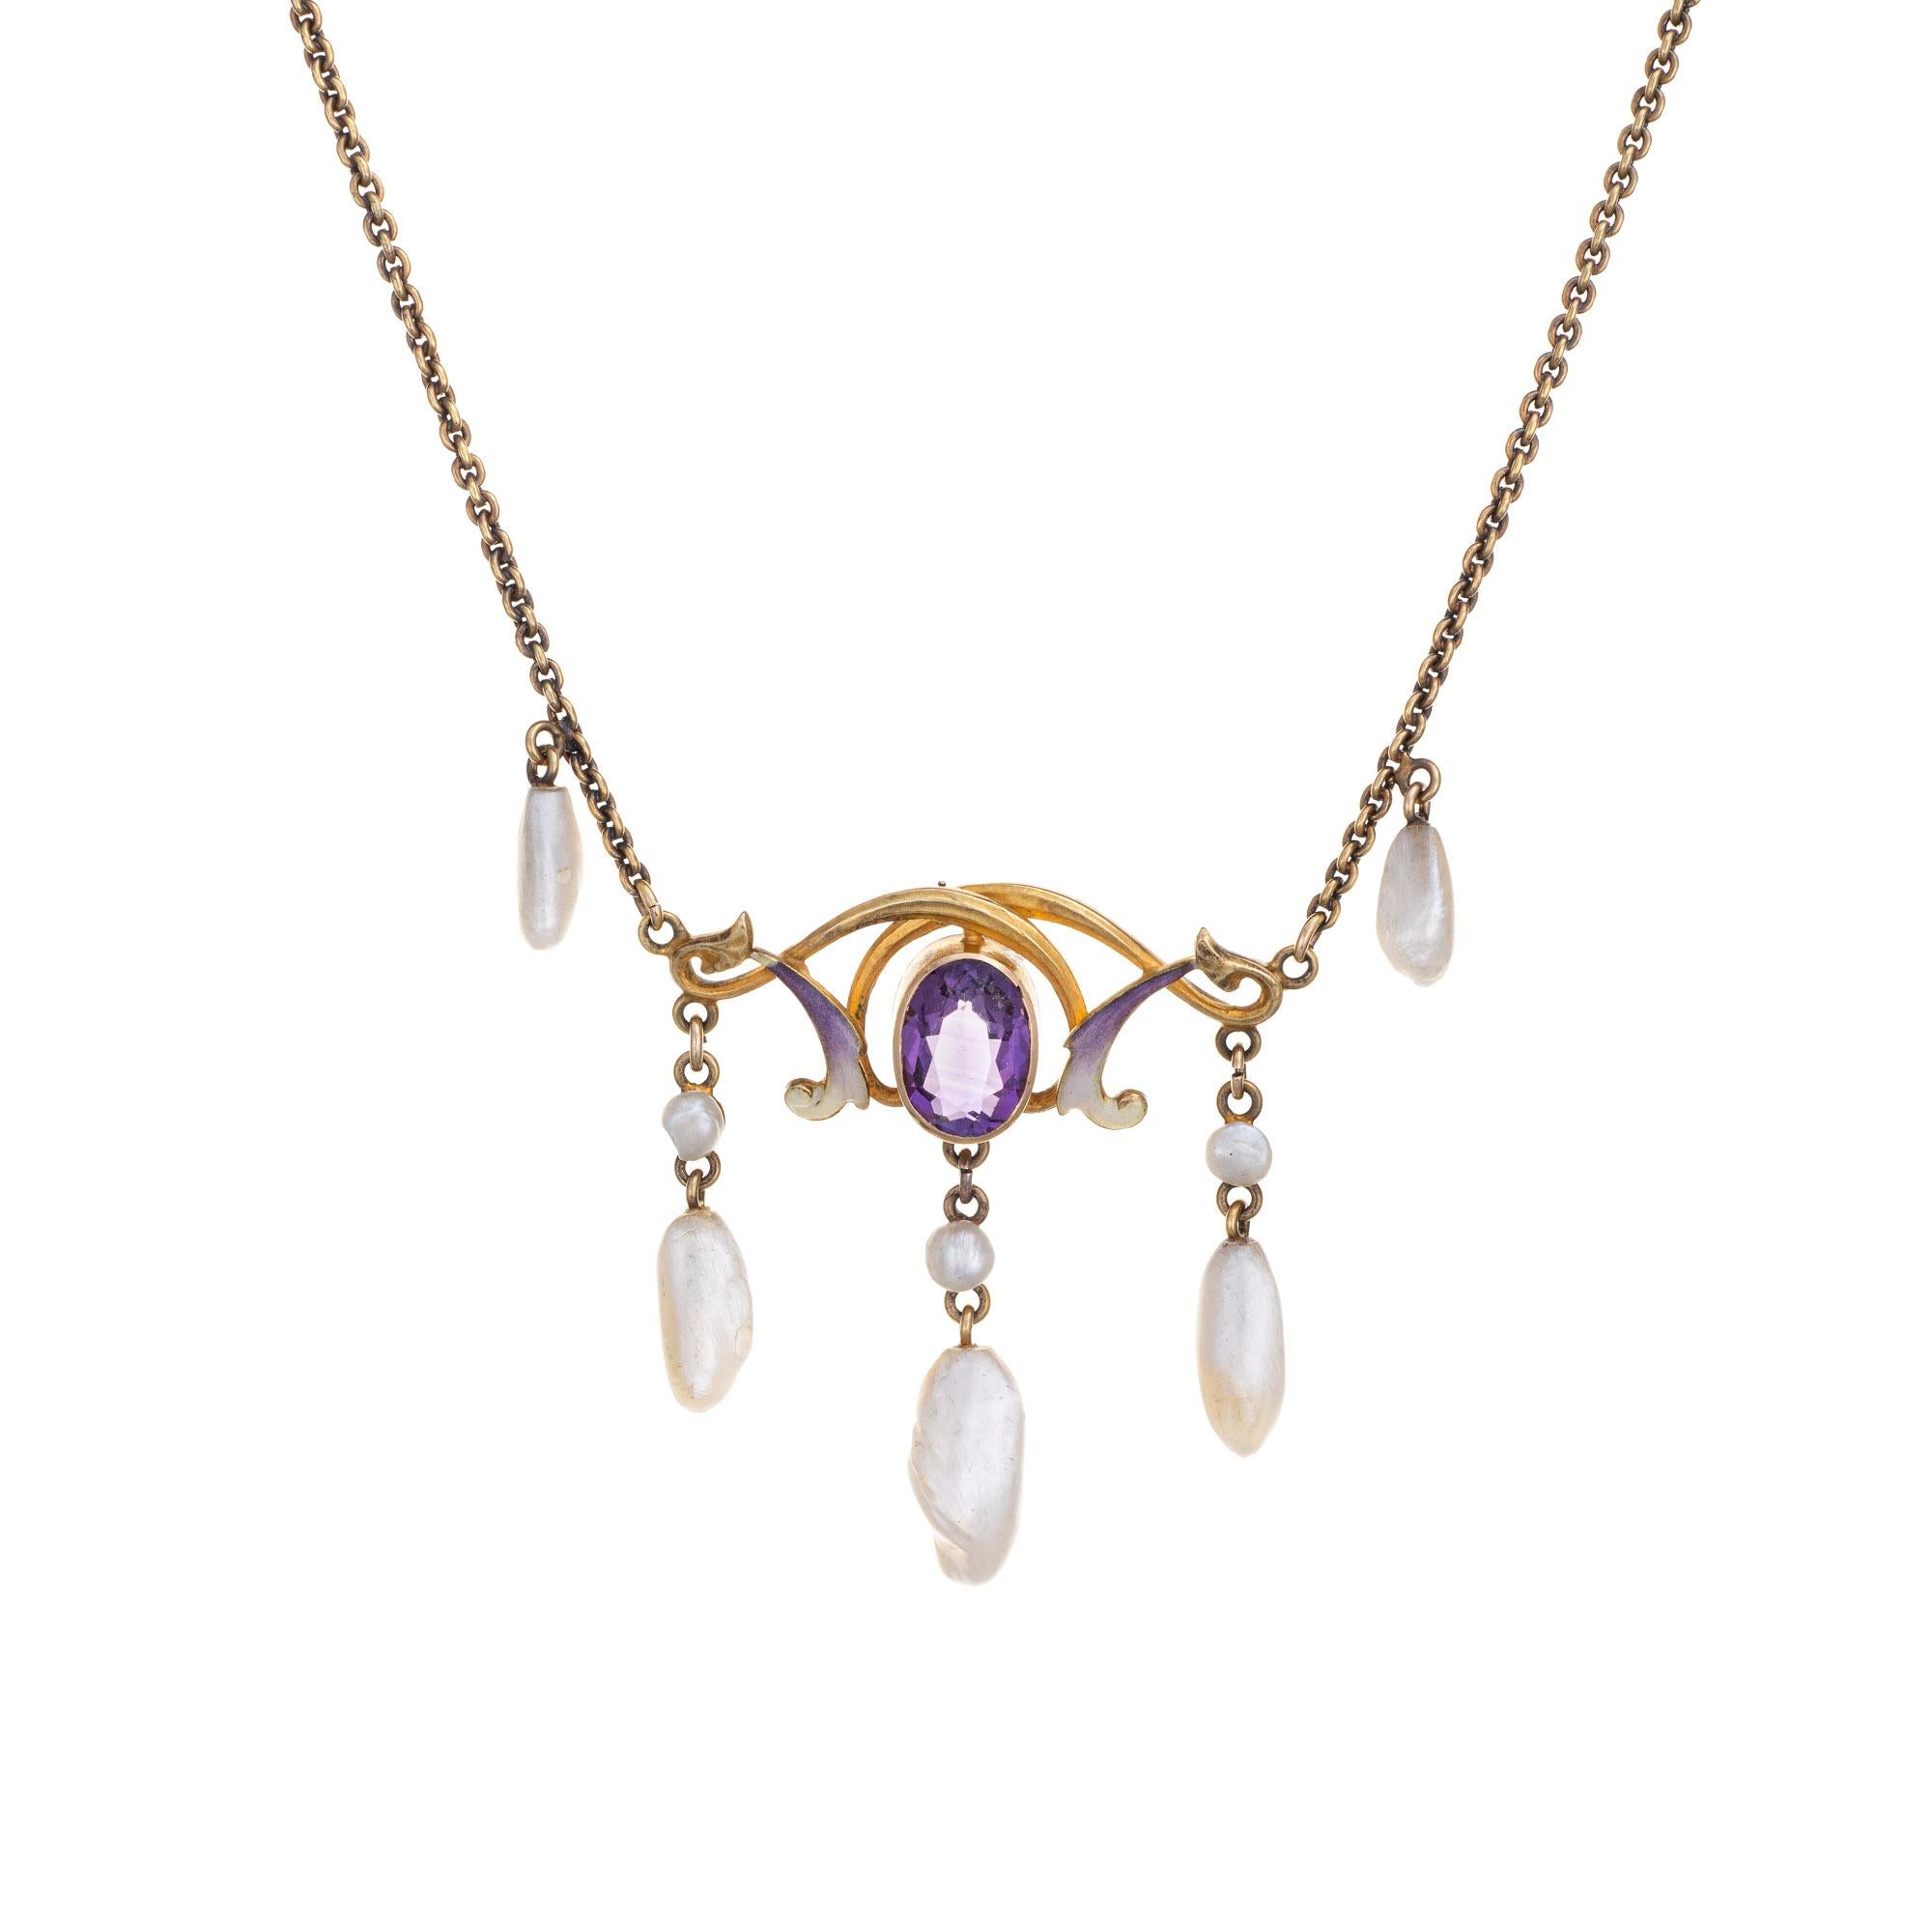 Antique Art Nouveau Necklace 14k Gold Amethyst Sawtooth Pearl Enamel Vintage In Good Condition For Sale In Torrance, CA